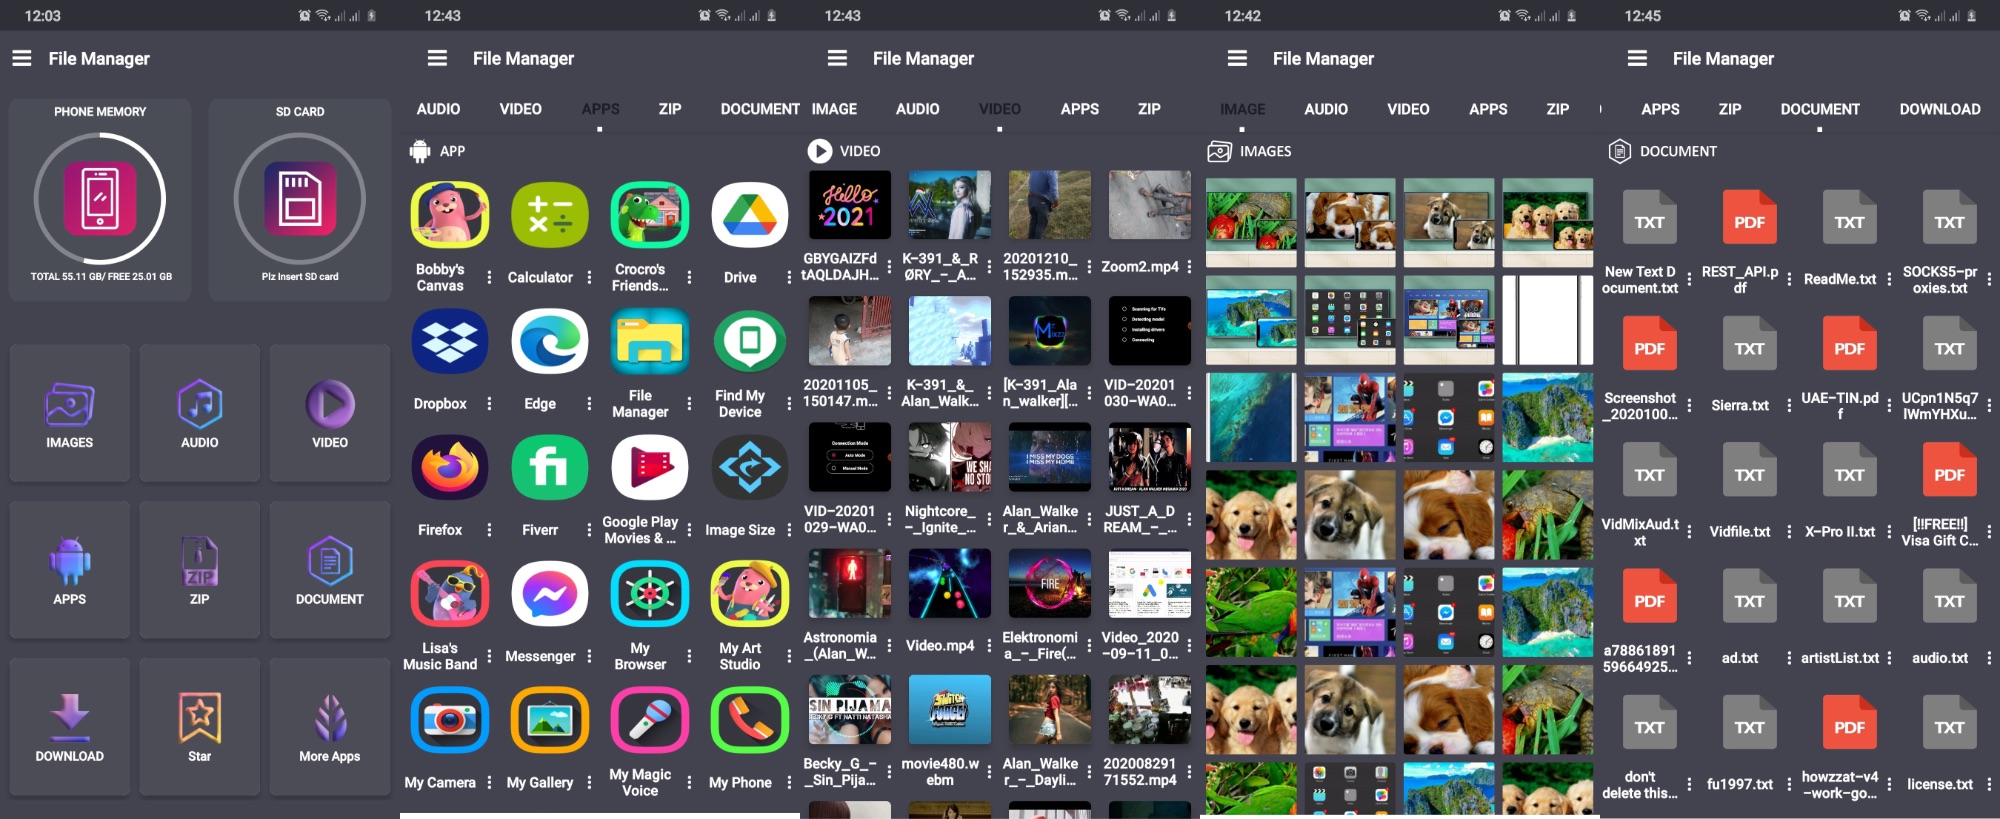 FIle Manager dla Androida